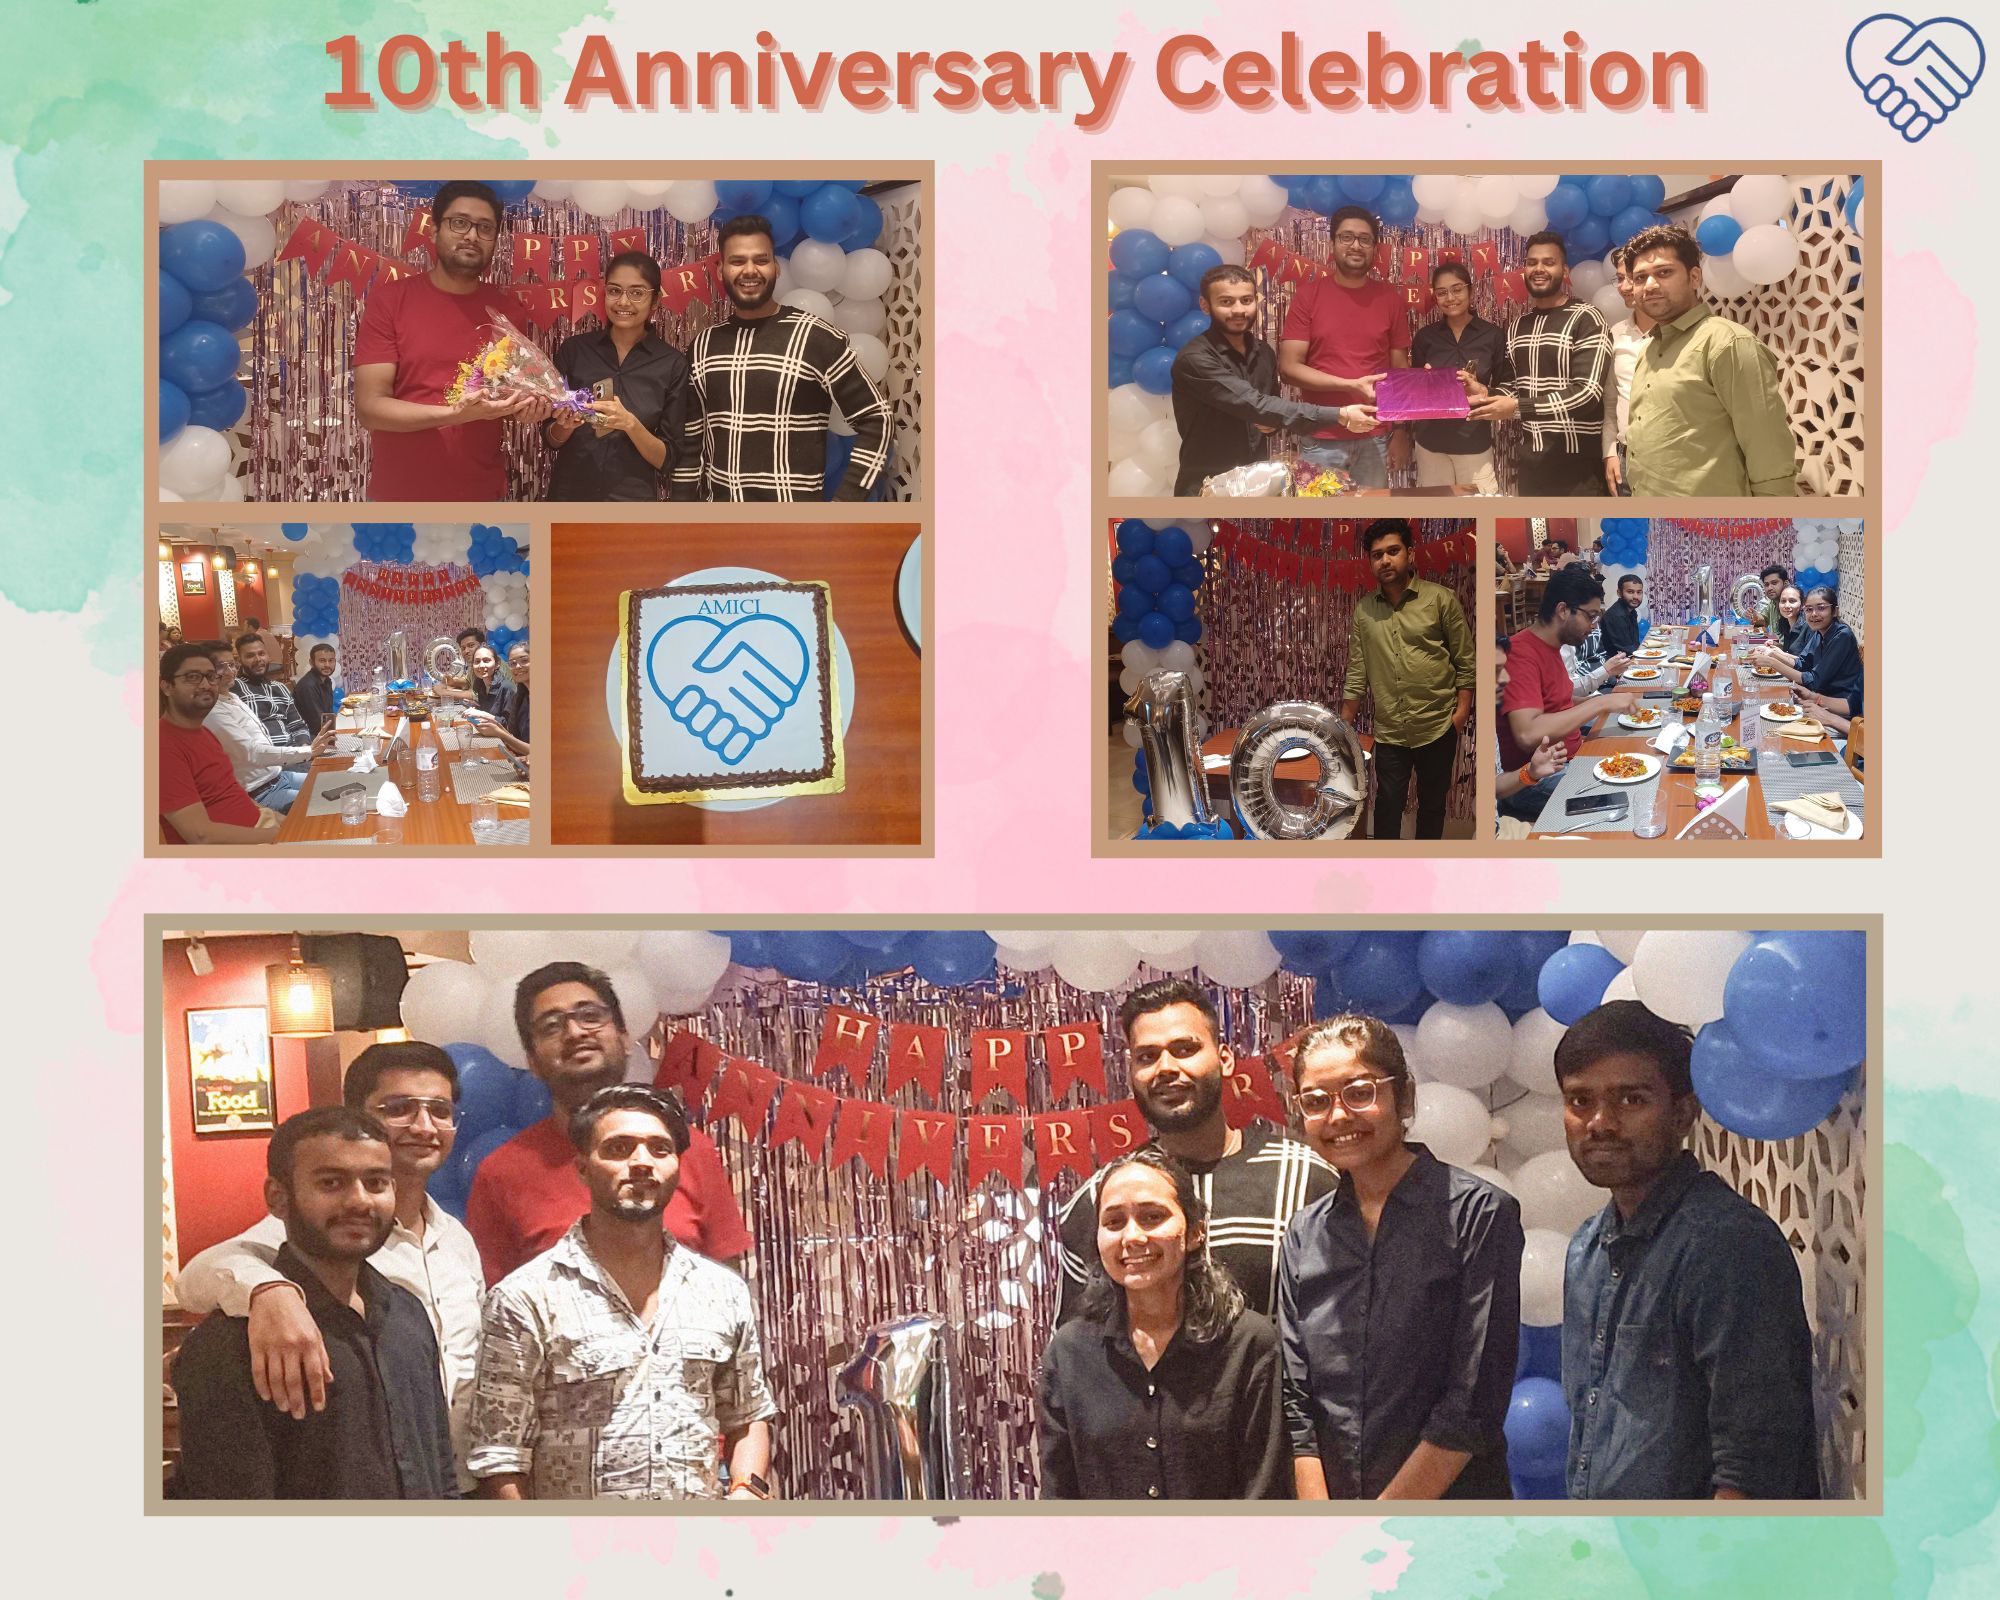 10th Anniversary Celebration - 10 years of AMICI